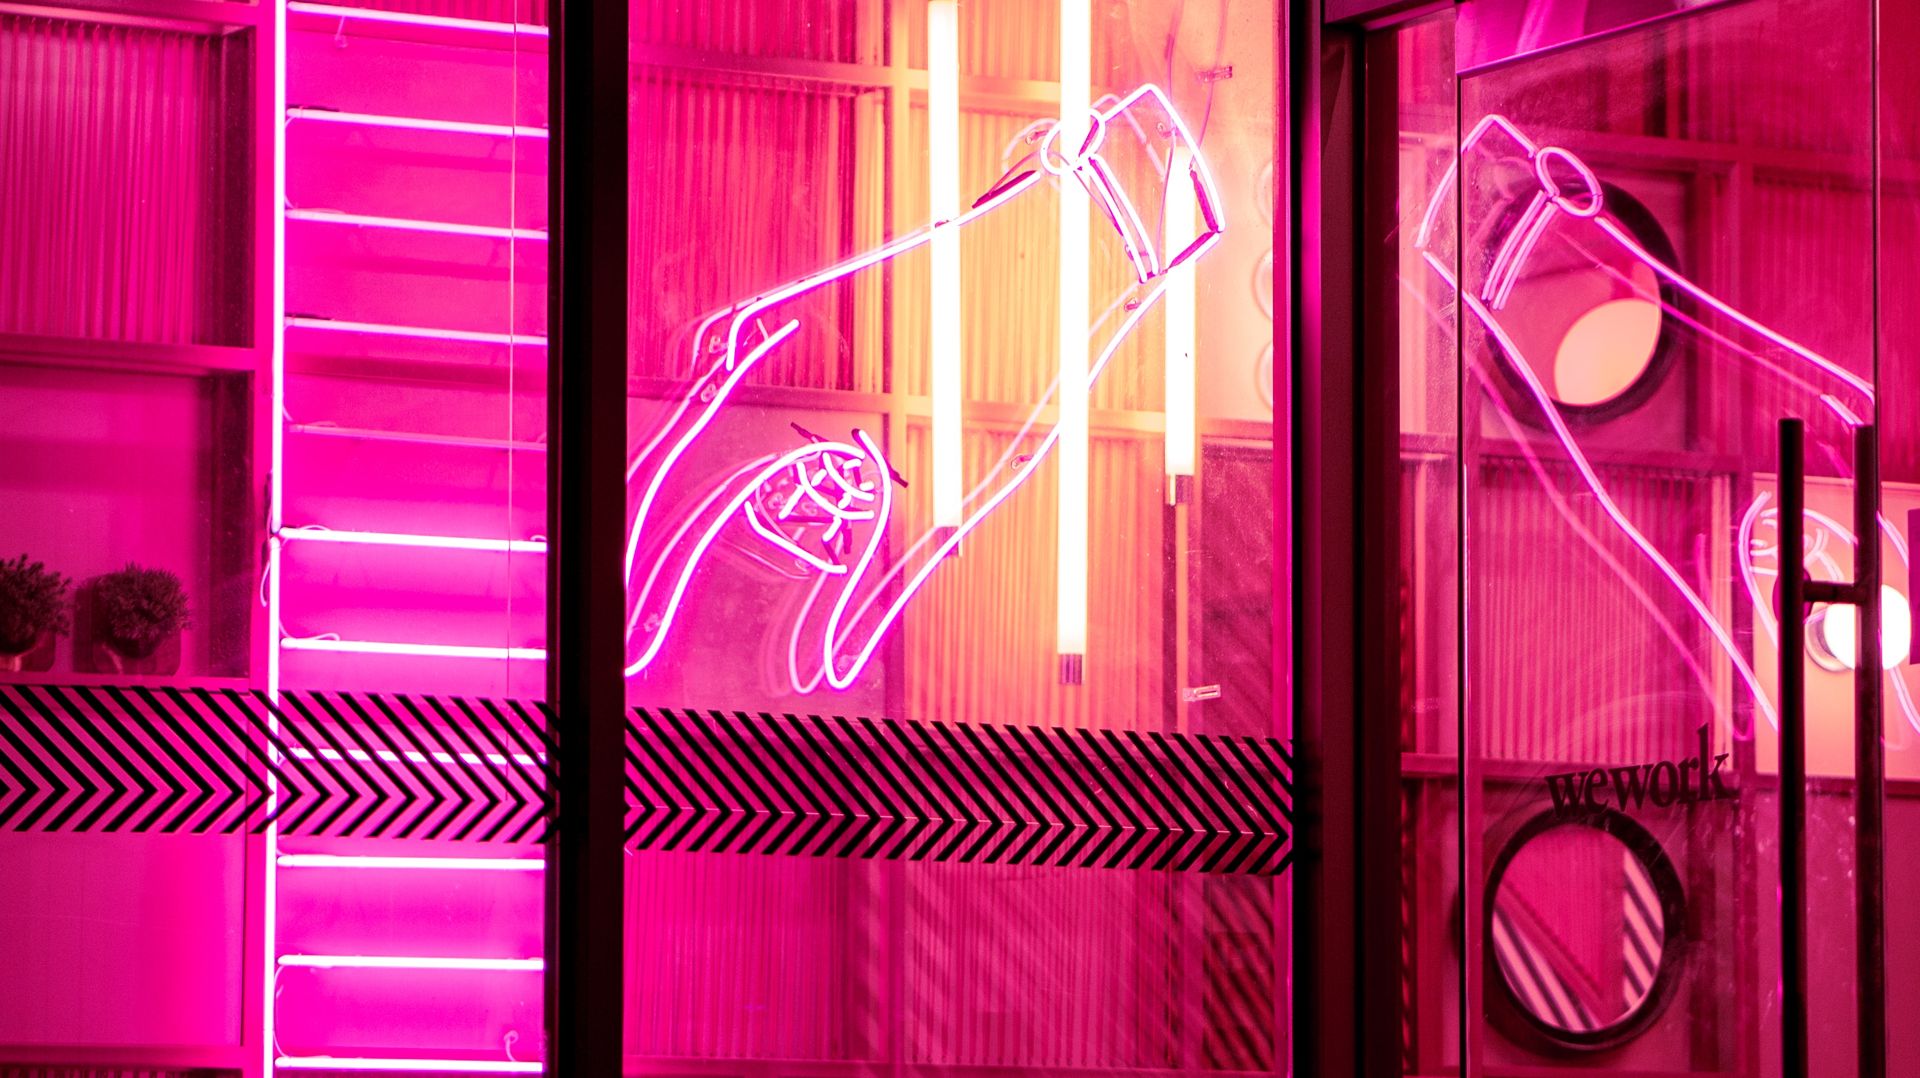 Interior completely lit by illustrative, pink or magenta neon signs.